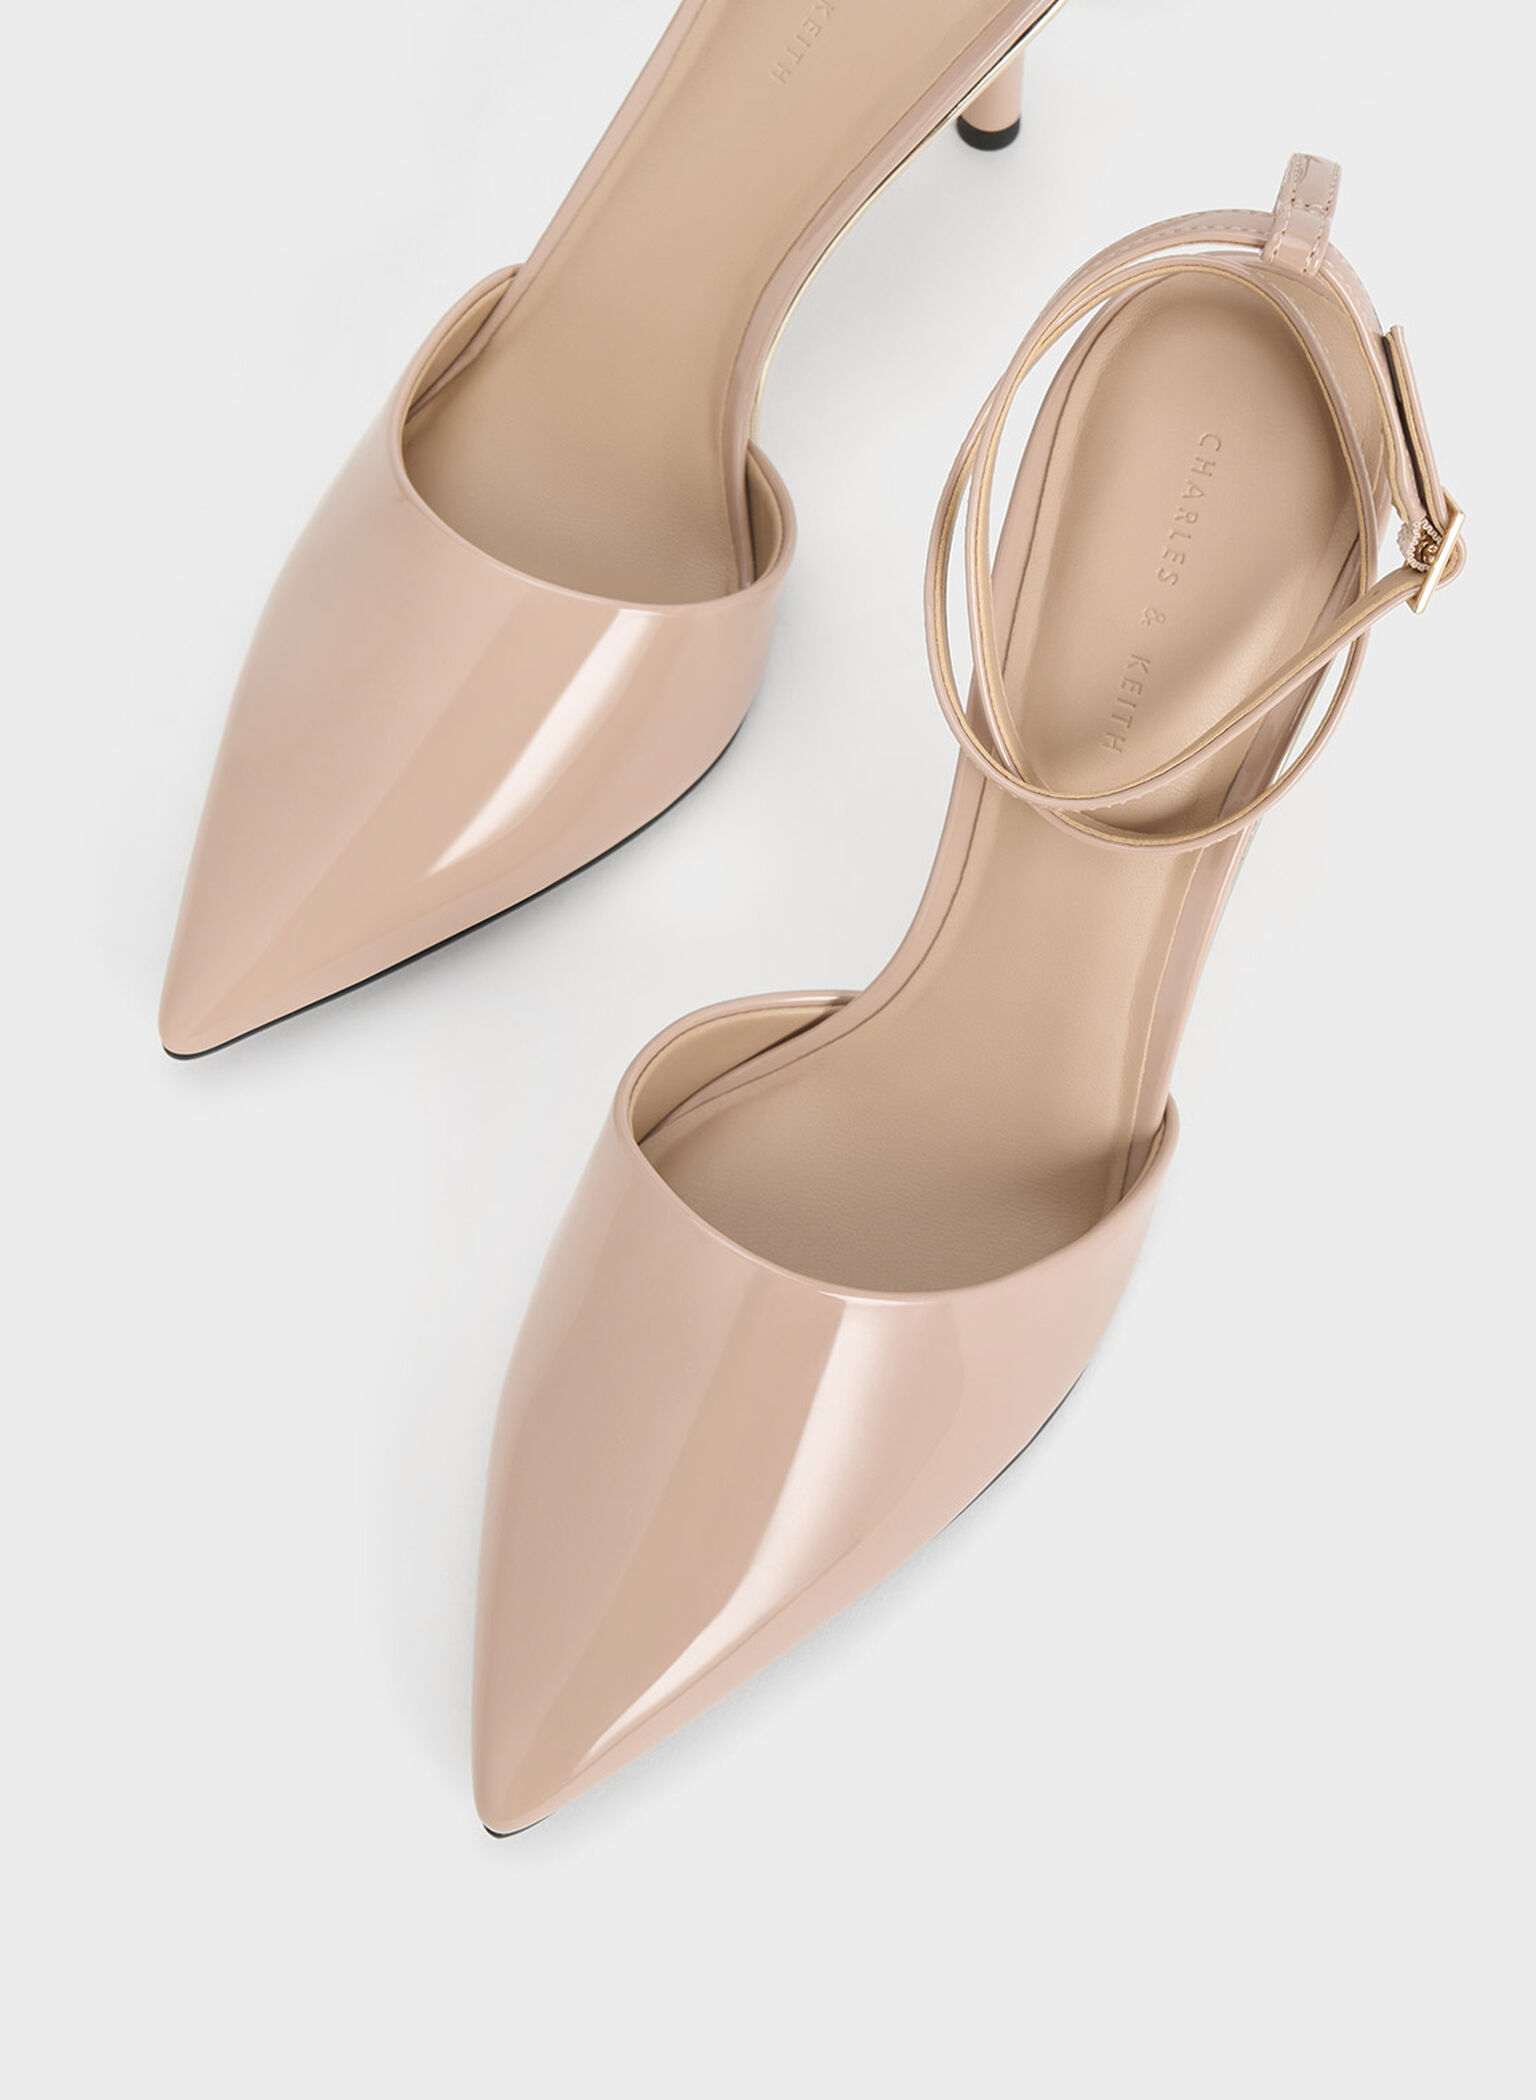 Patent Pointed-Toe Ankle-Strap Pumps, Nude, hi-res